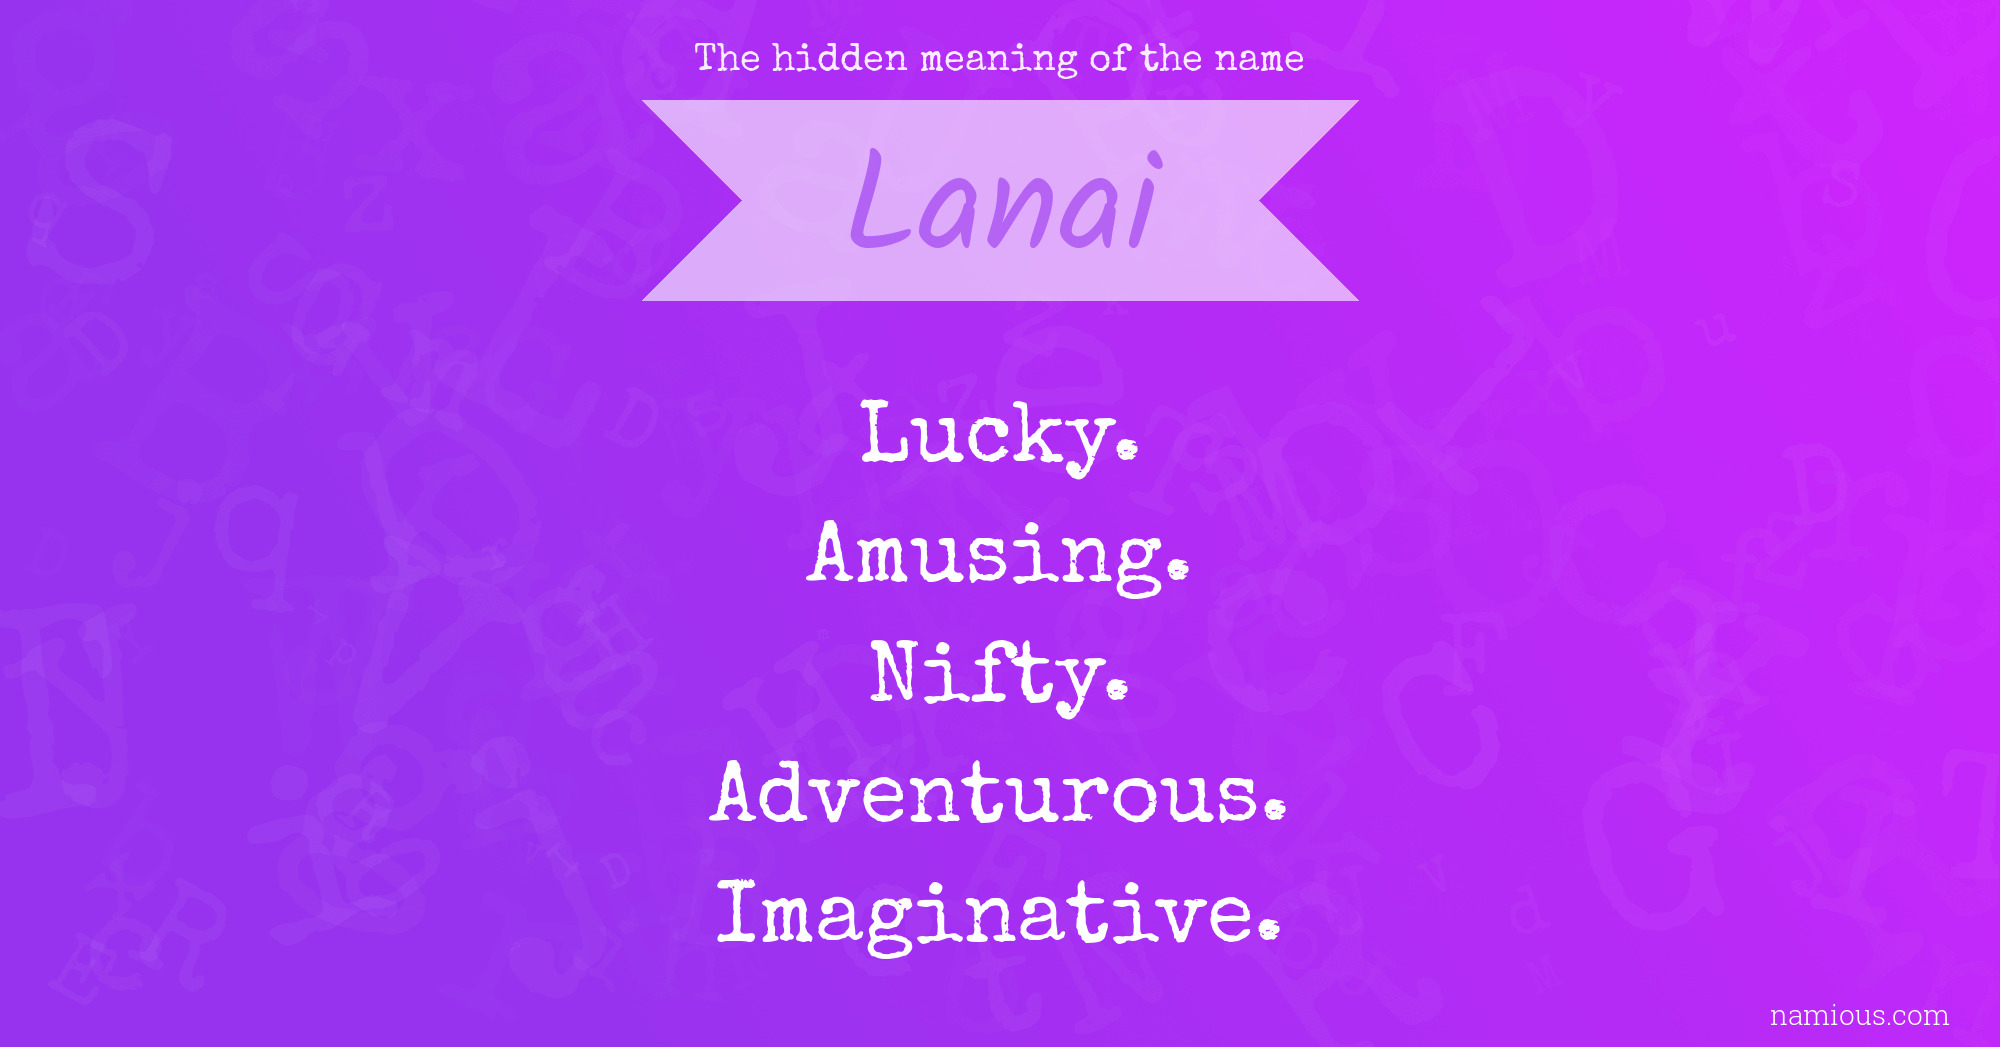 The hidden meaning of the name Lanai